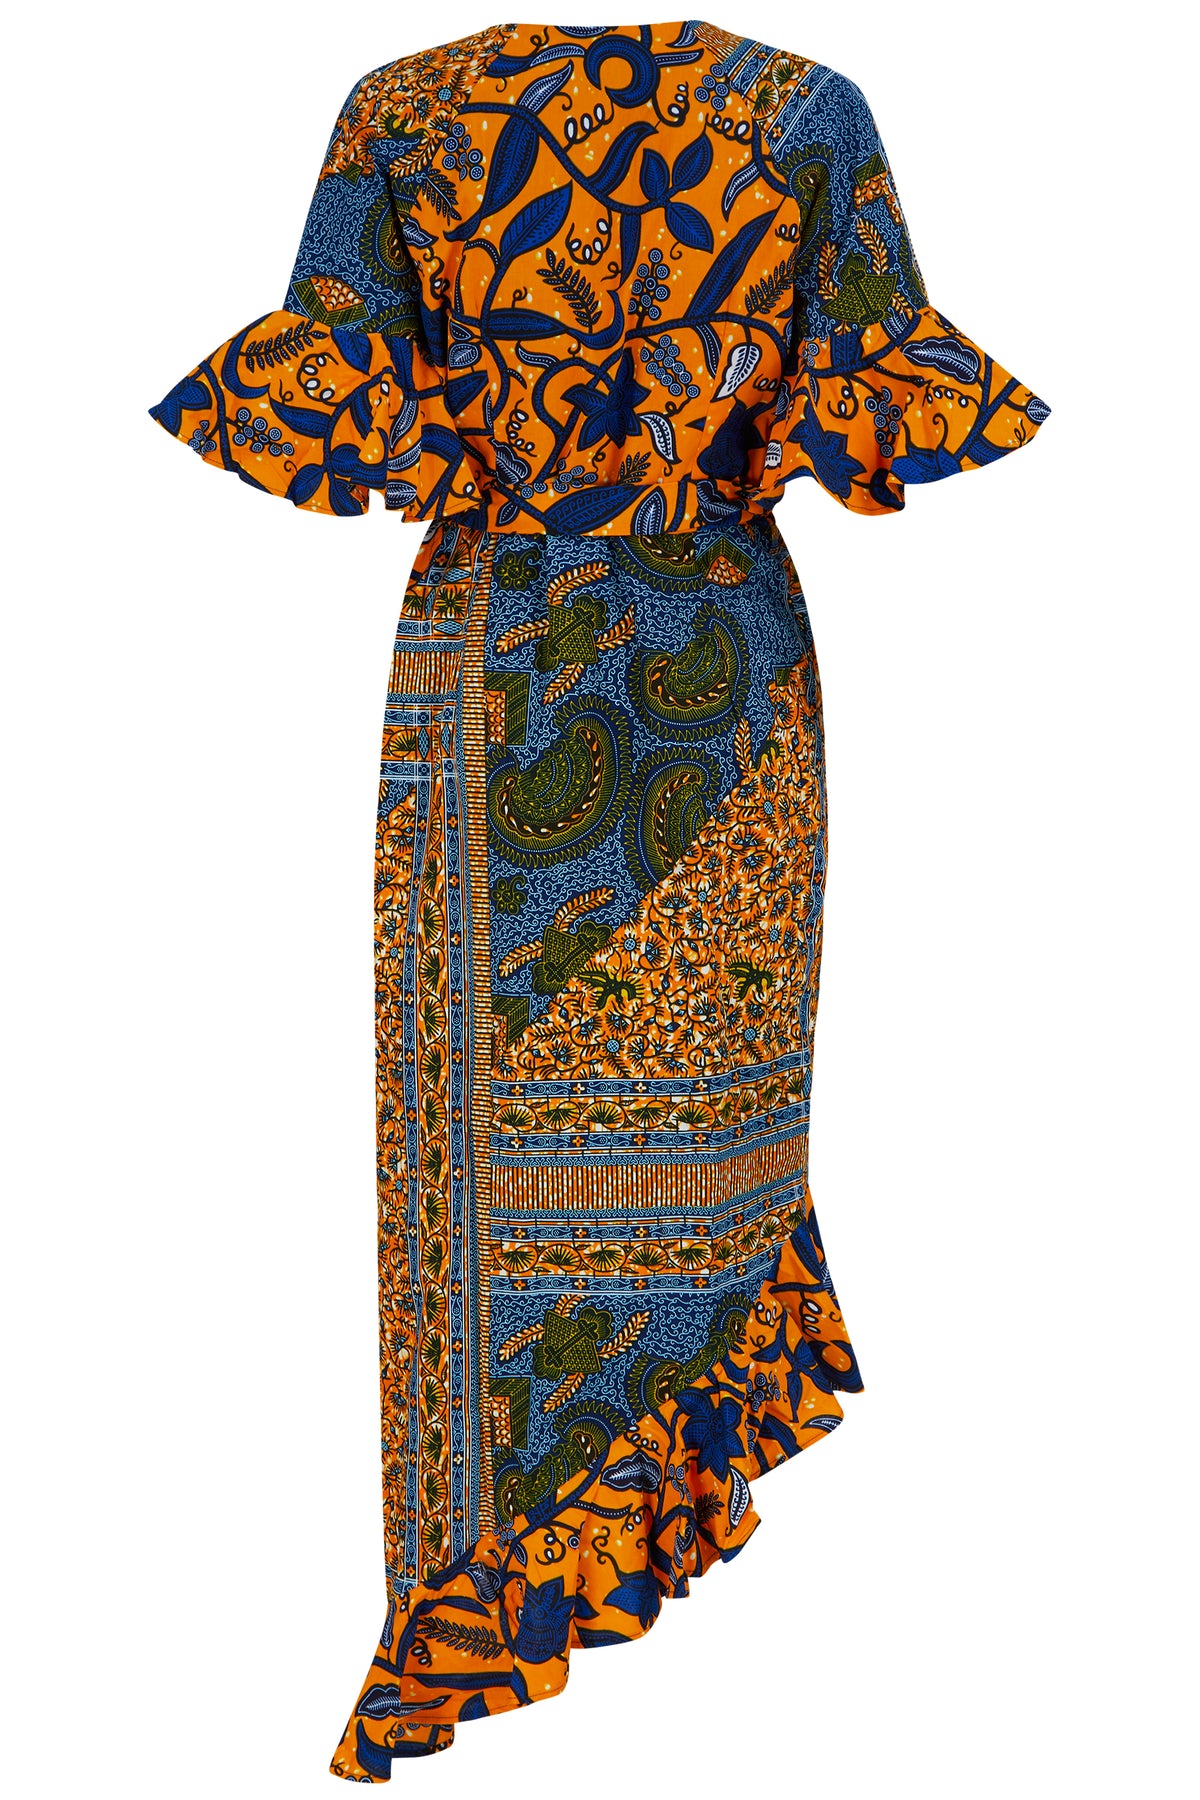 Ameila Print Clash Midaxi Wrap front dress - OHEMA OHENE AFRICAN INSPIRED FASHION